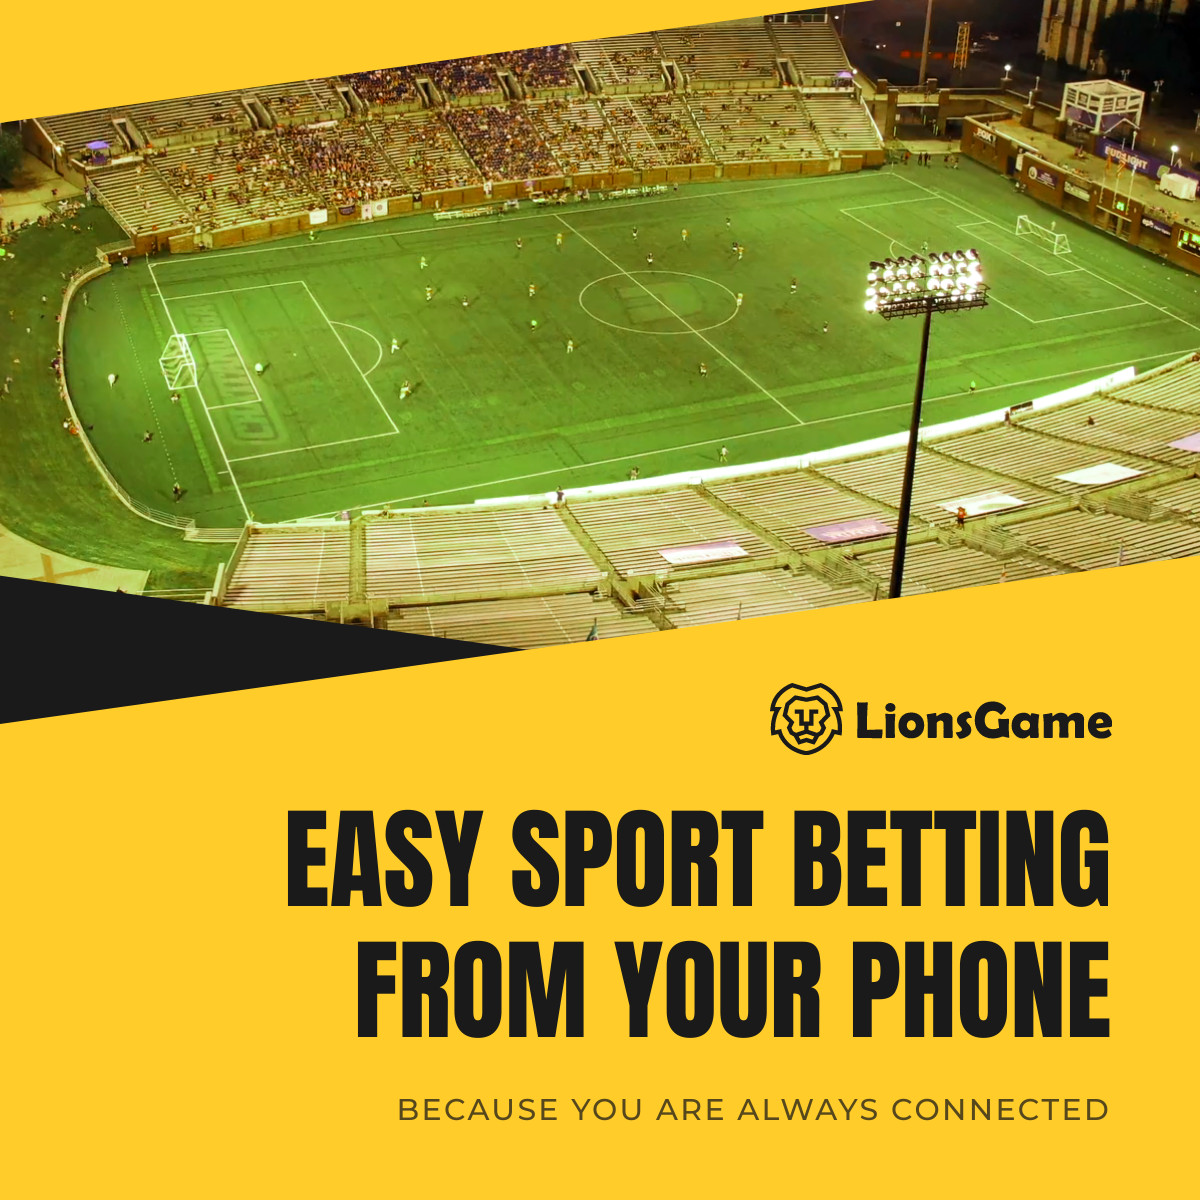 Easy Sport Betting from Phone Video Facebook Video Cover 1250x463